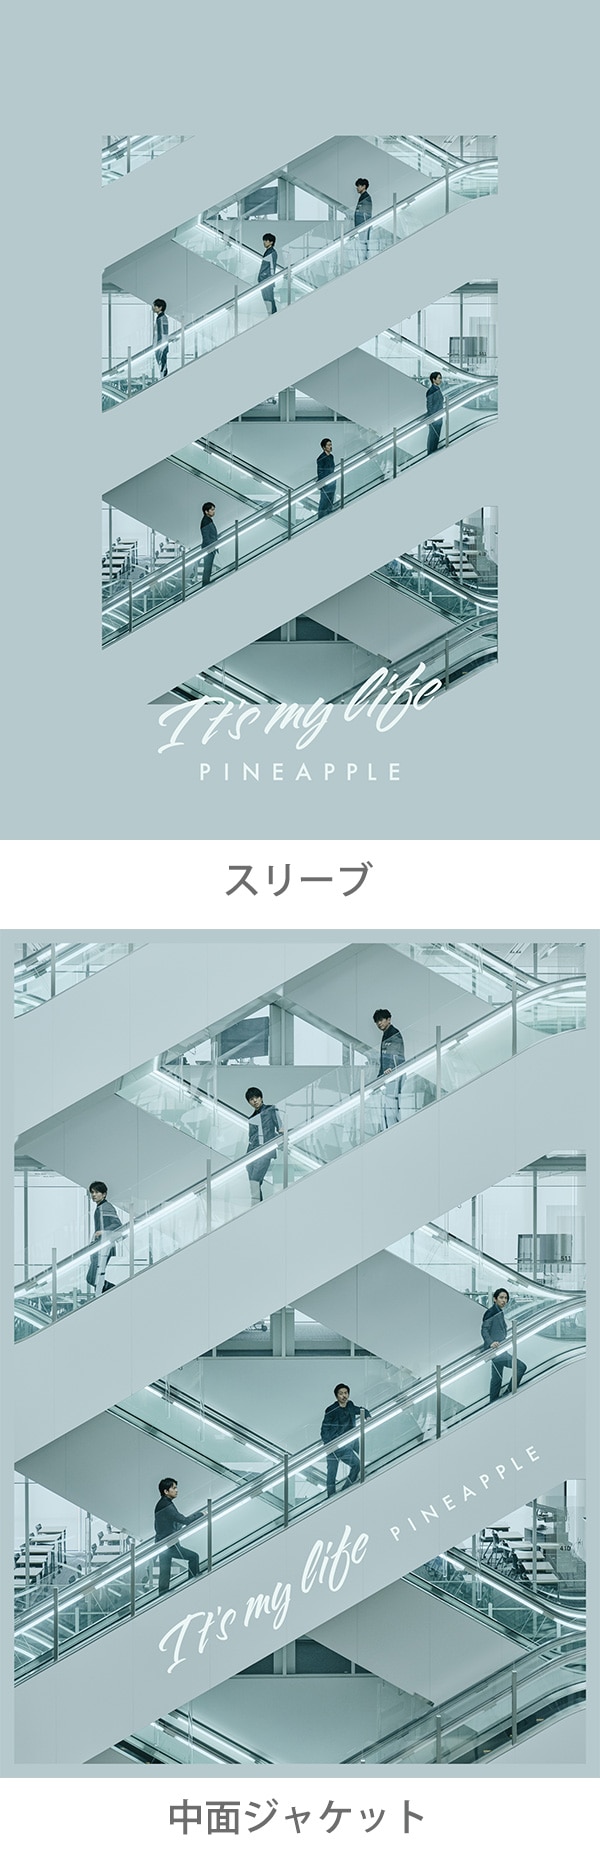 52nd SINGLE 「It's my life / PINEAPPLE 」 - DISCOGRAPHY | V6 